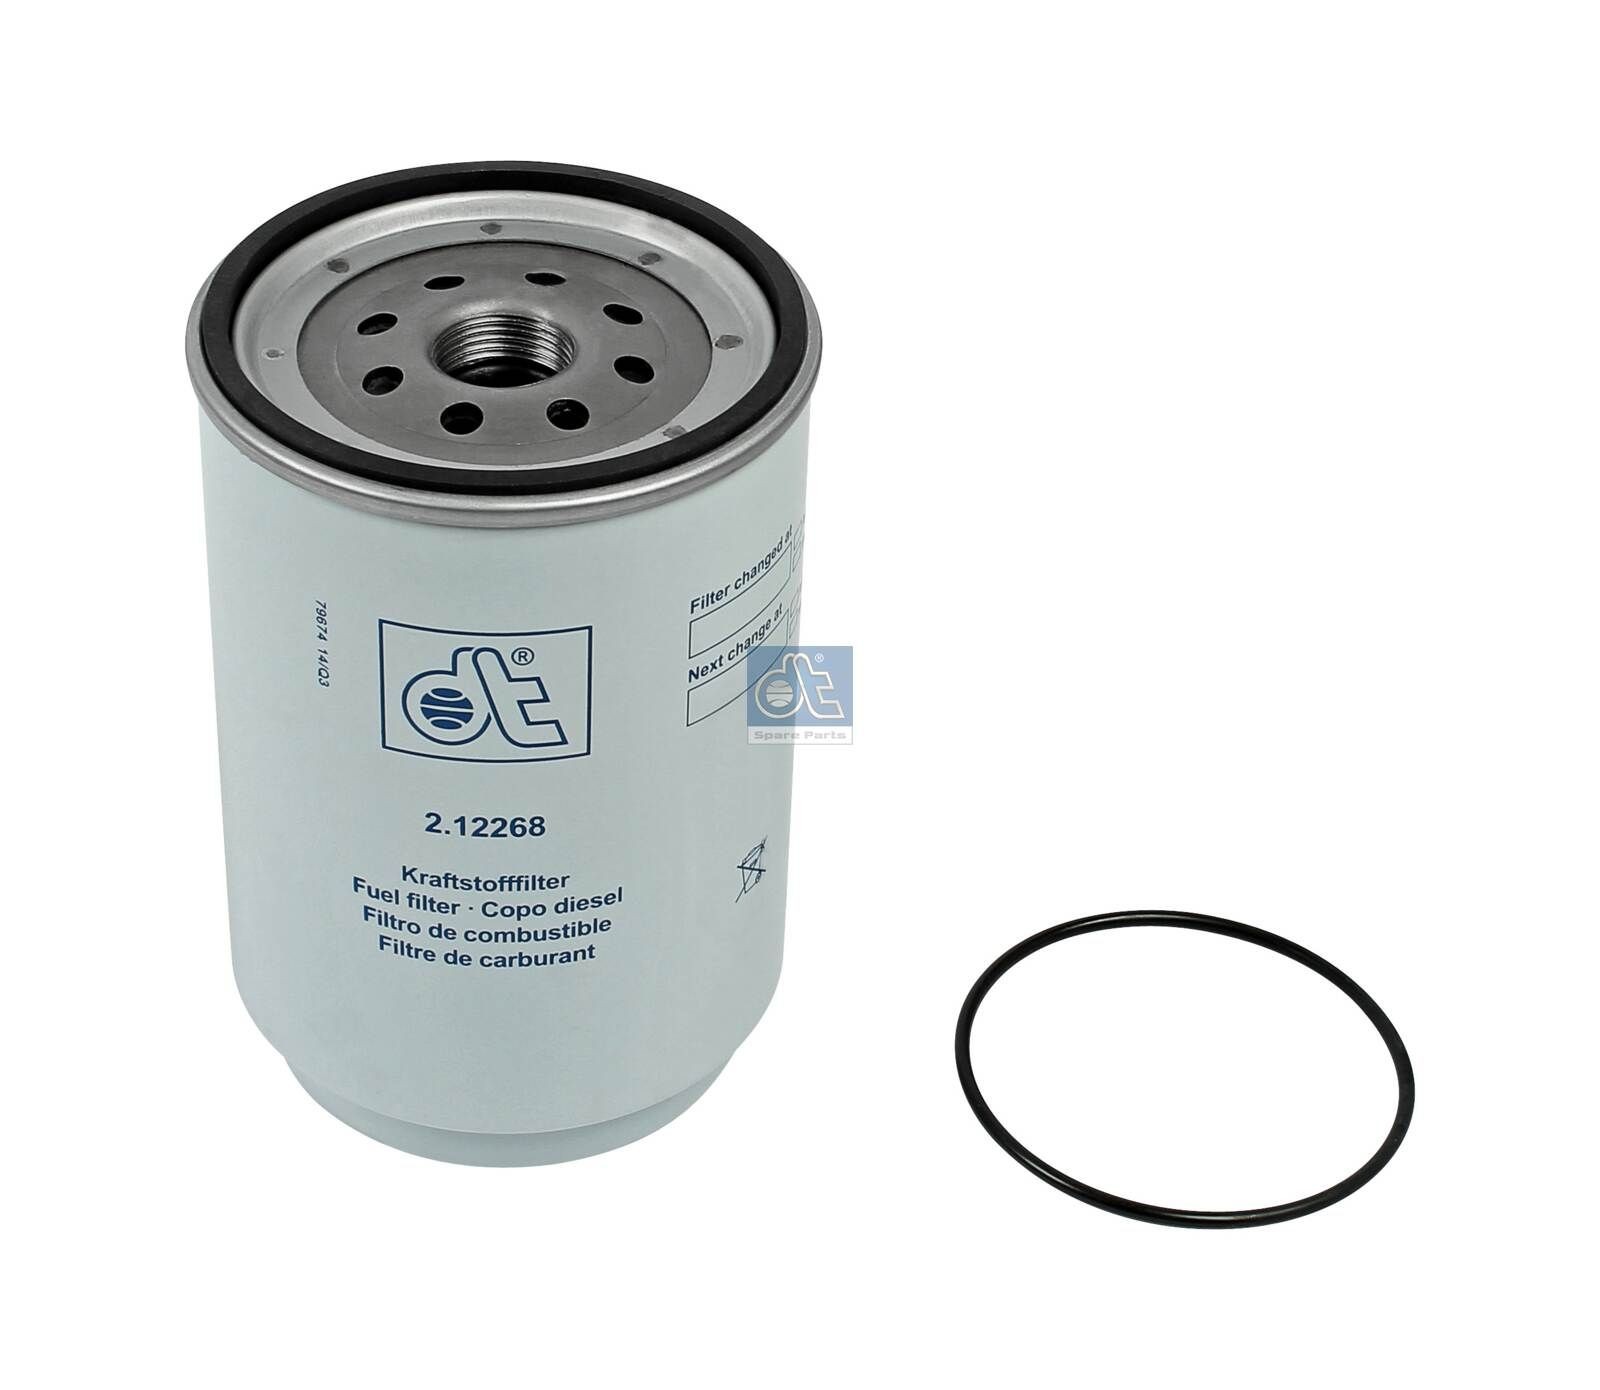 WK 11 001 x DT Spare Parts 2.12268 Fuel filter 20869725